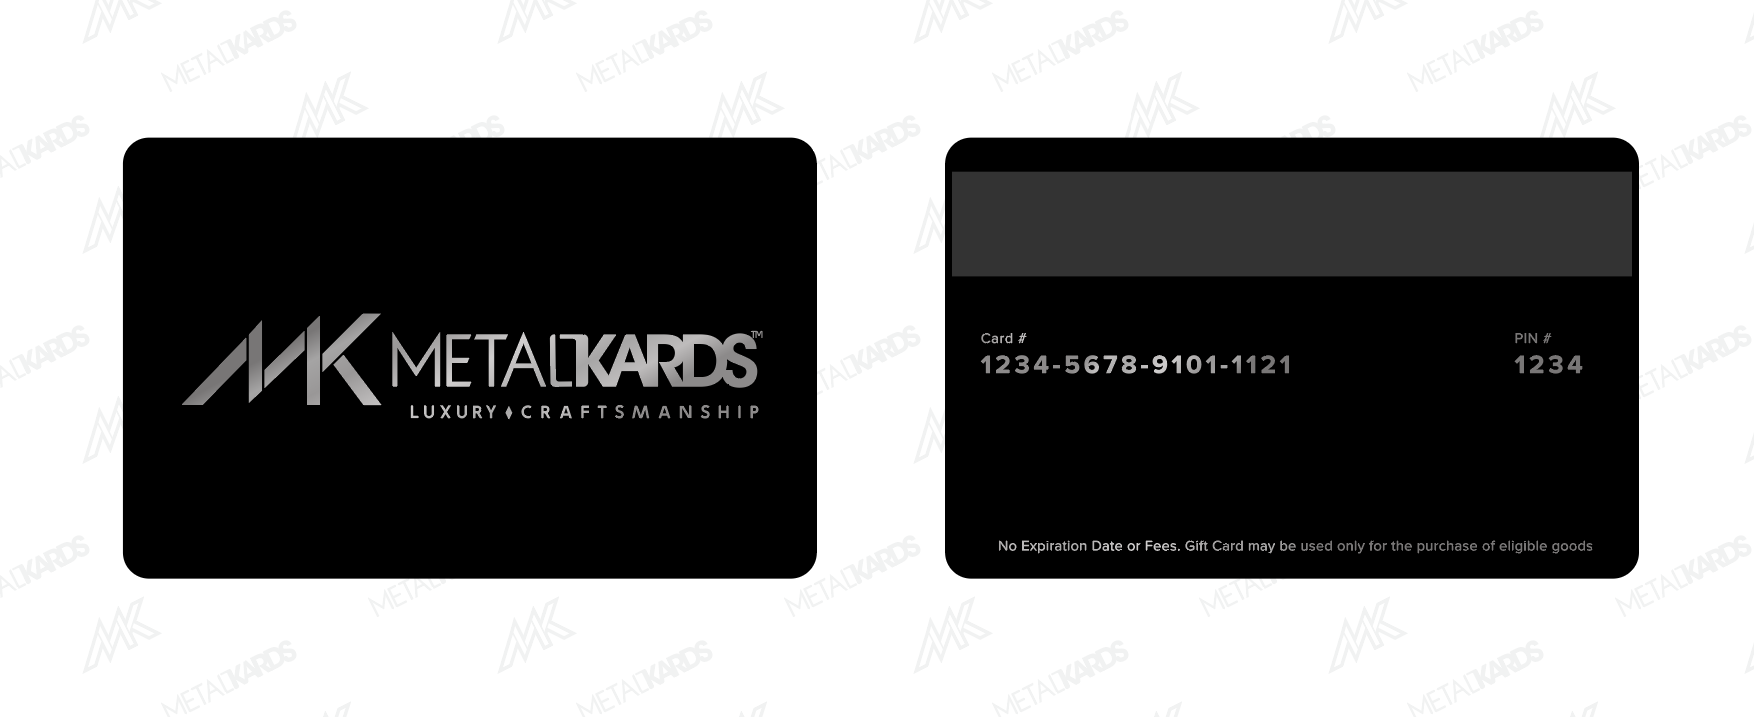 Black Metal Cards with Silver Printing